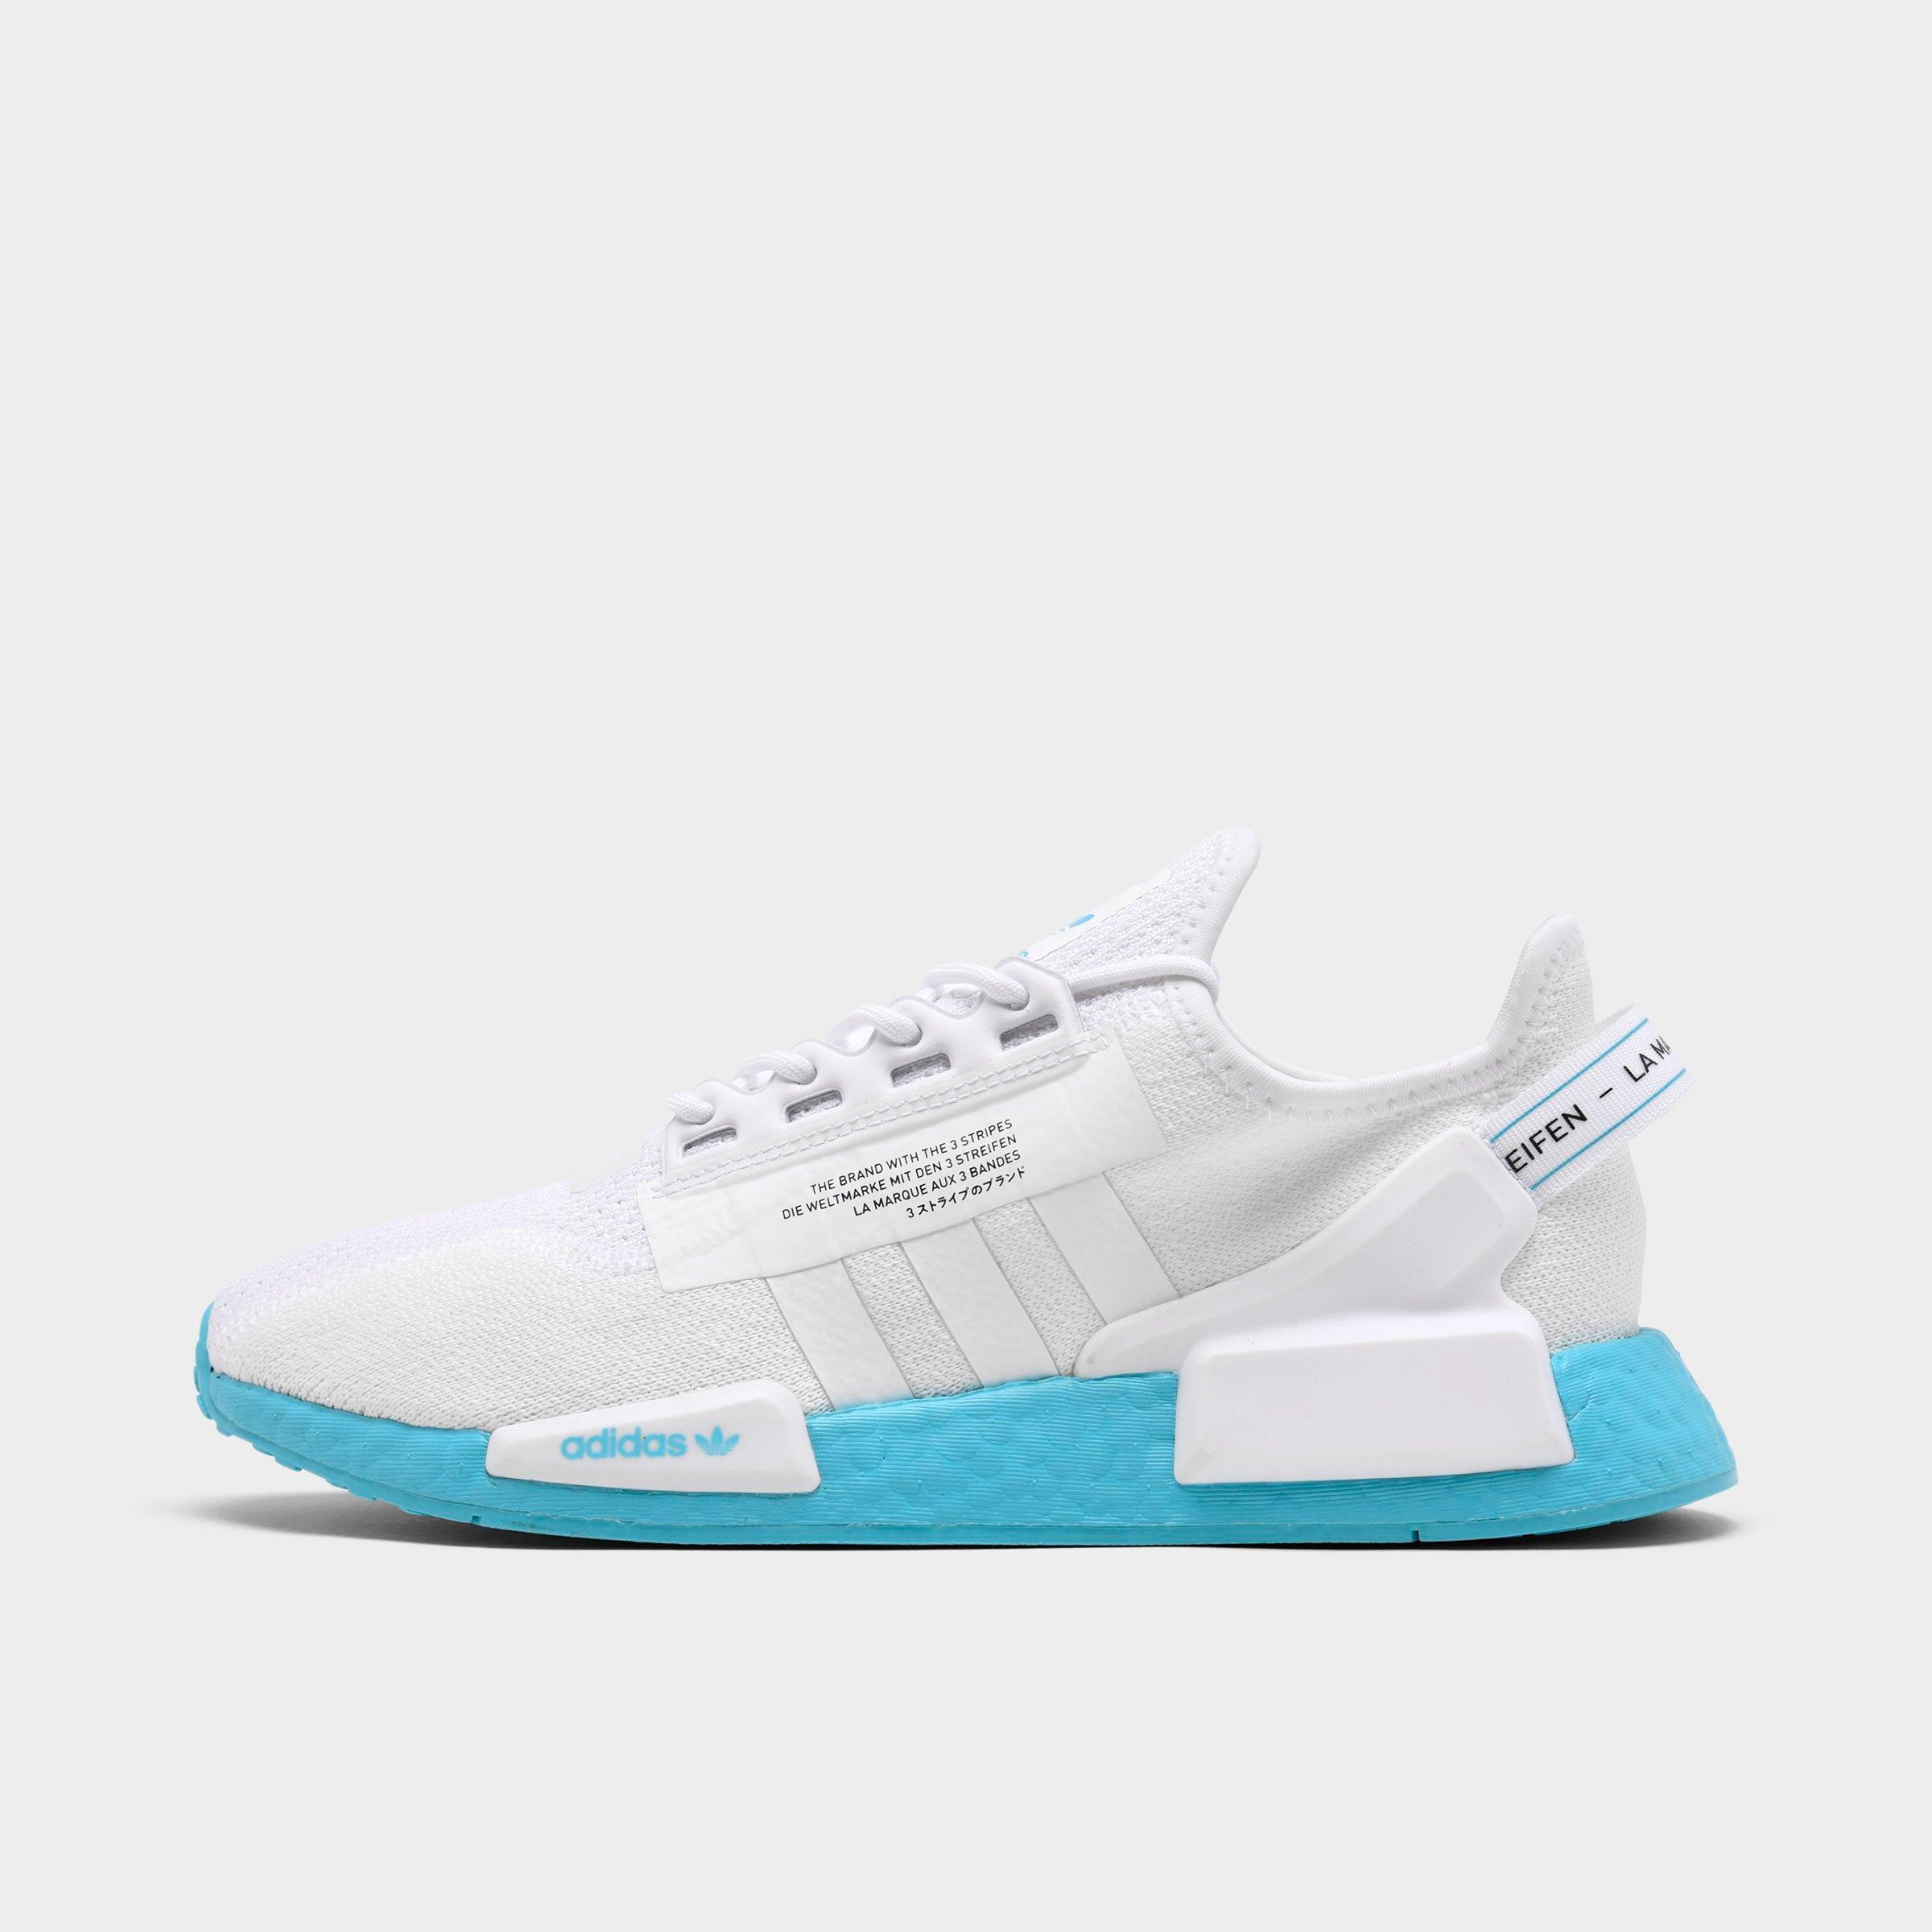 Adidas NMD R1 Unity Blue S31502 mensize US 85 NEW